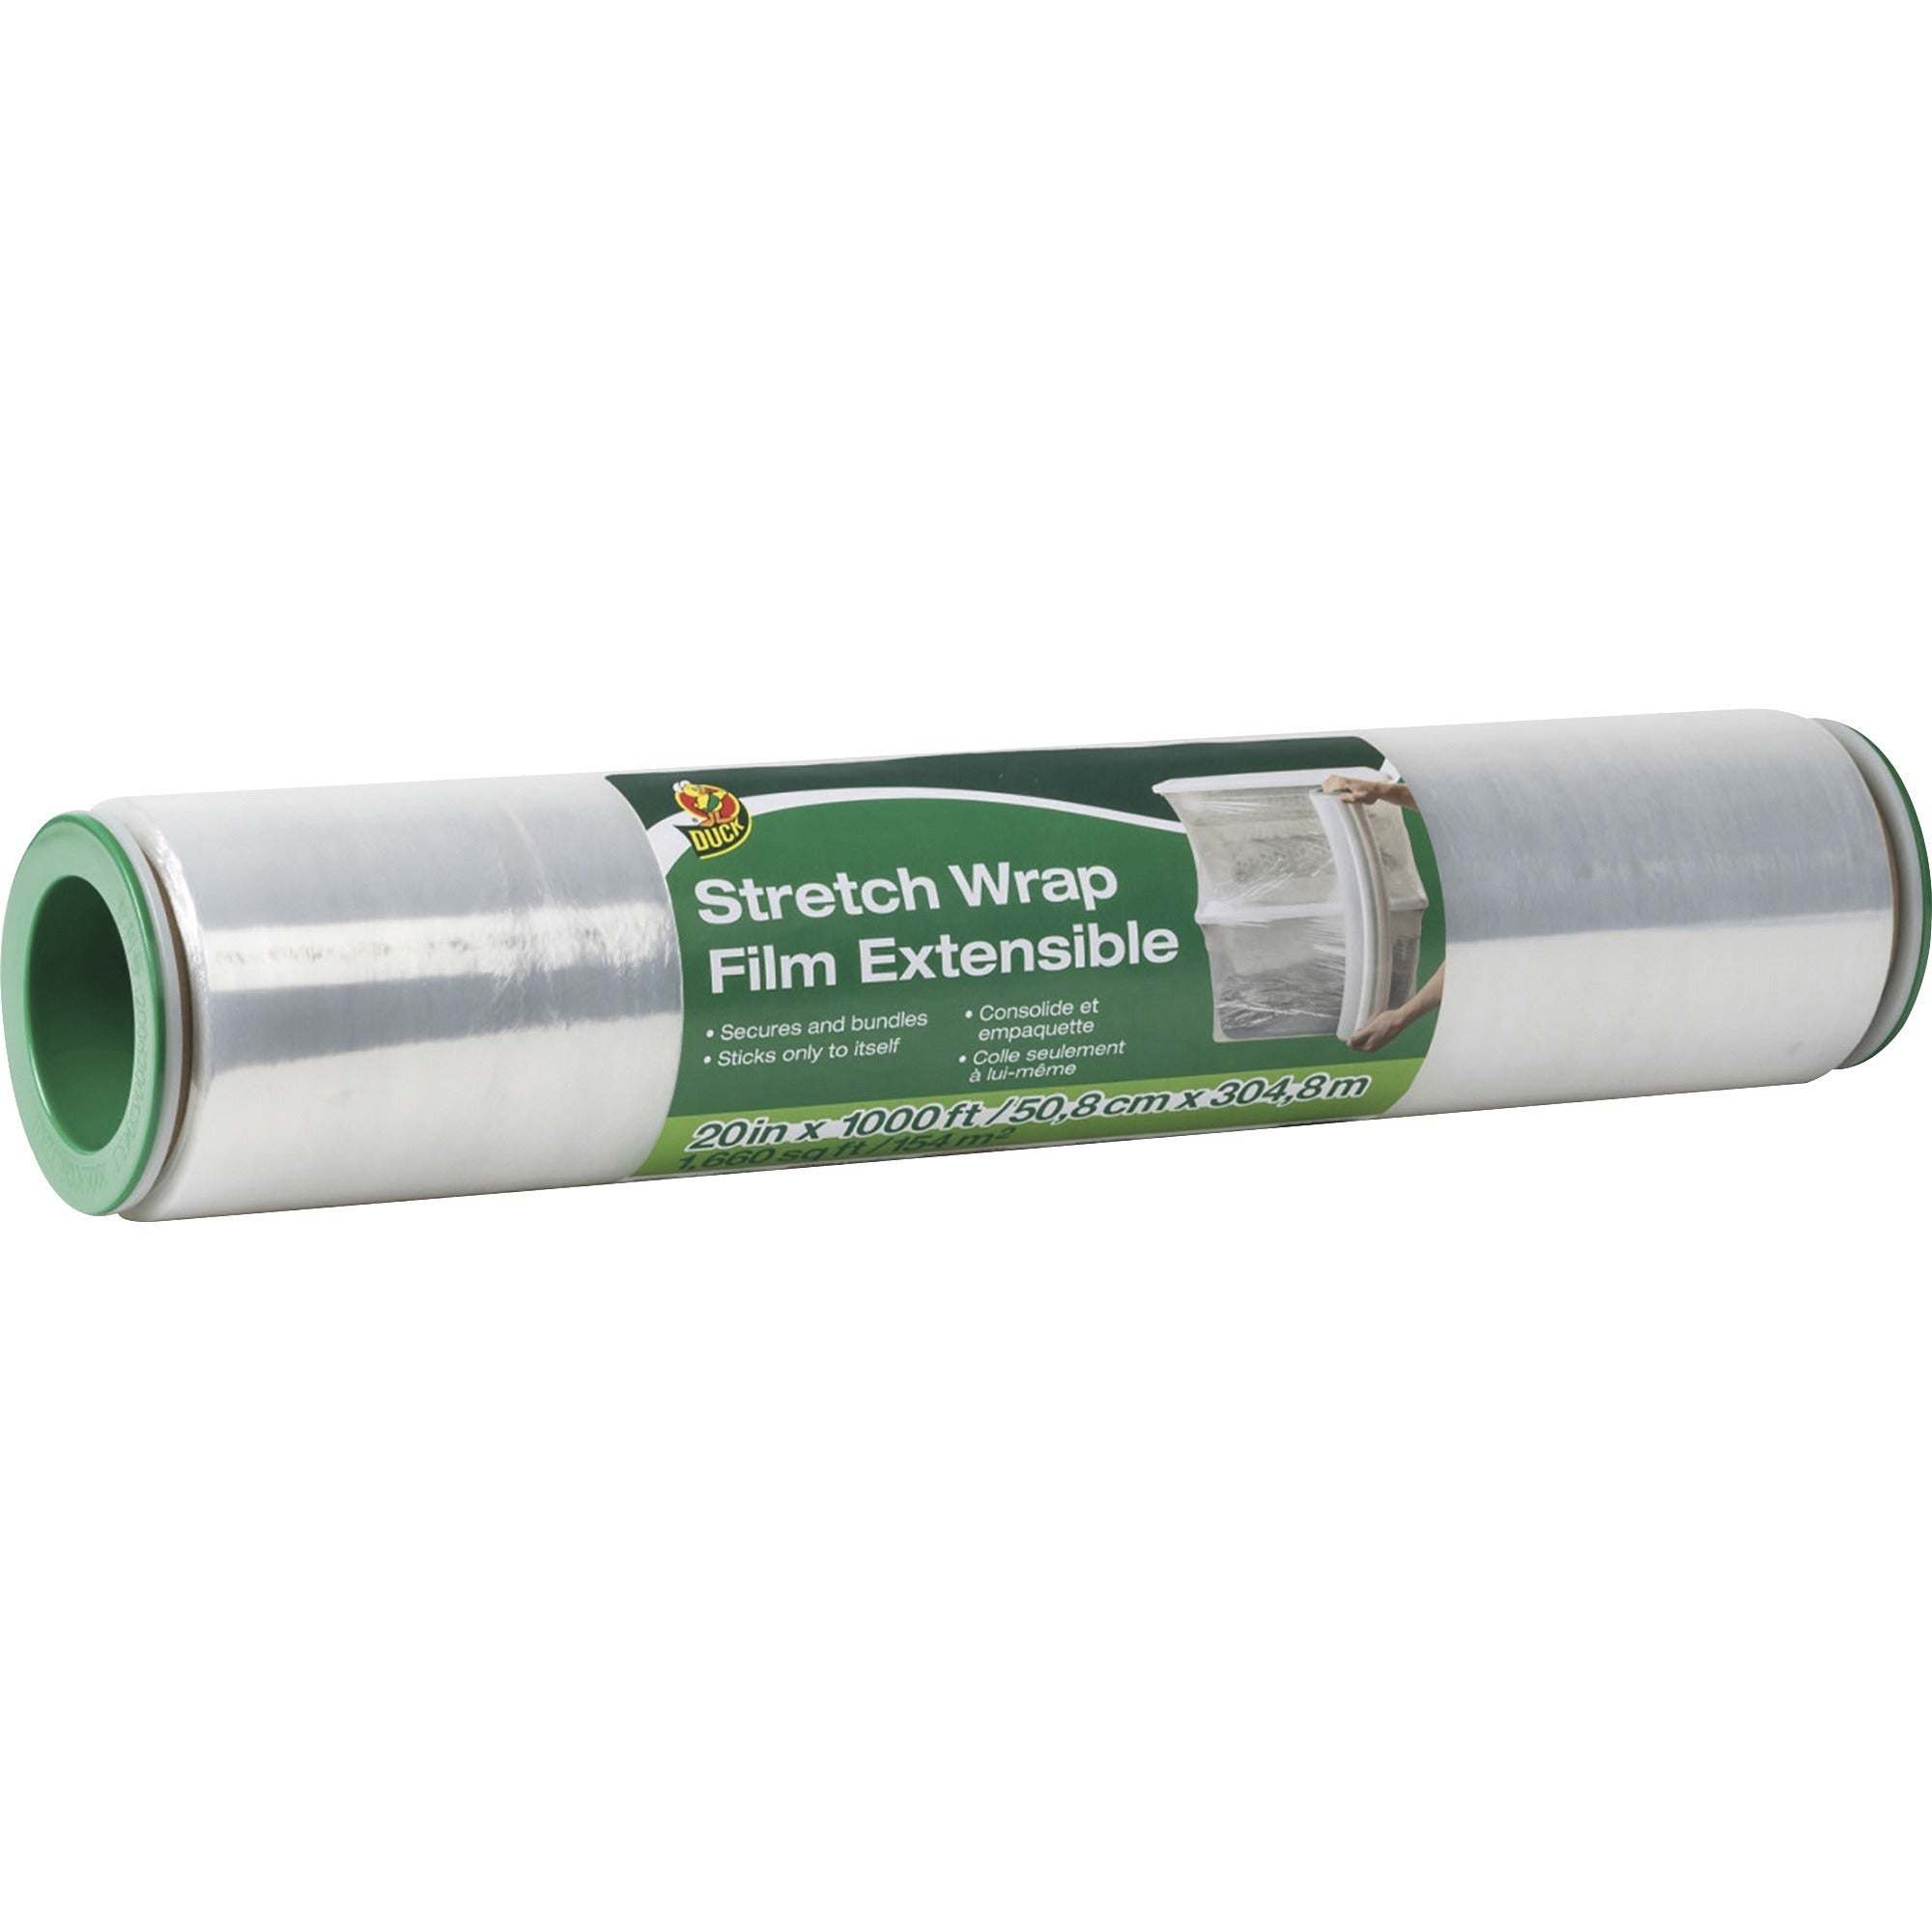 duck-extensible-stretch-wrap-film-20-width-x-1000-ft-length-non-adhesive-durable-handle-self-stick-plastic-film-clear-1each_duc285850 - 1